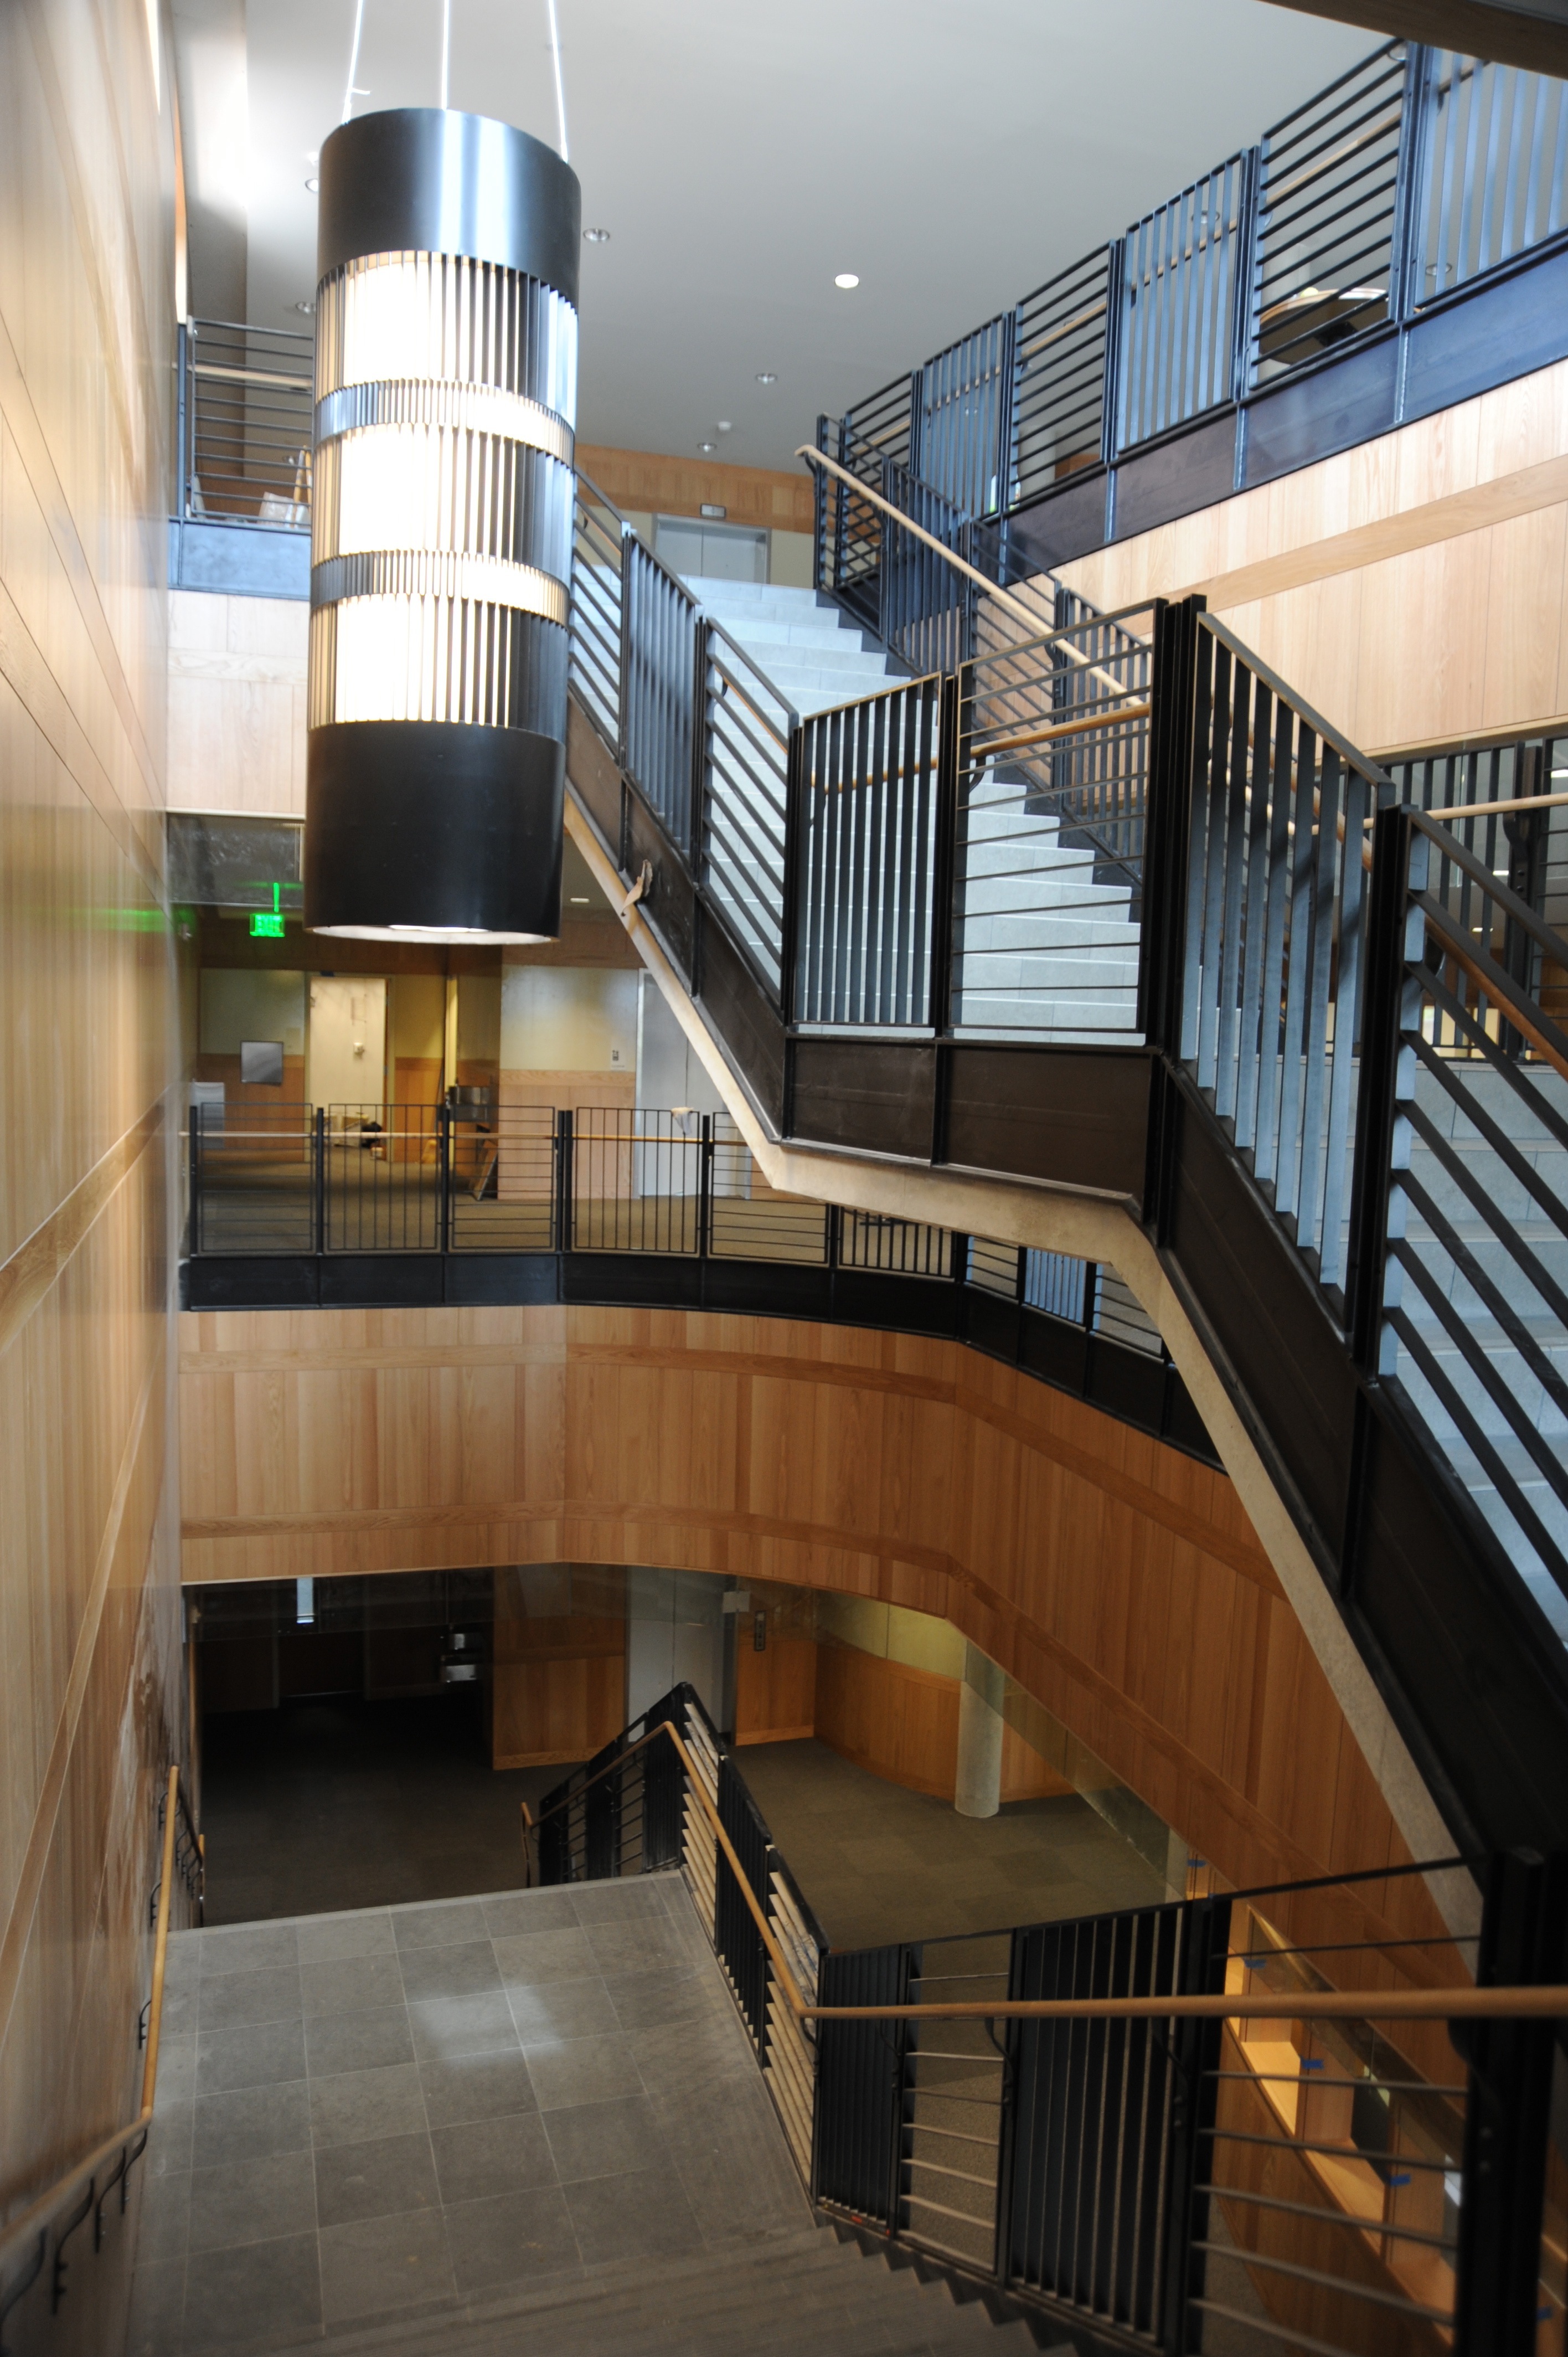 The building's grand stairway is a stunning interior feature.